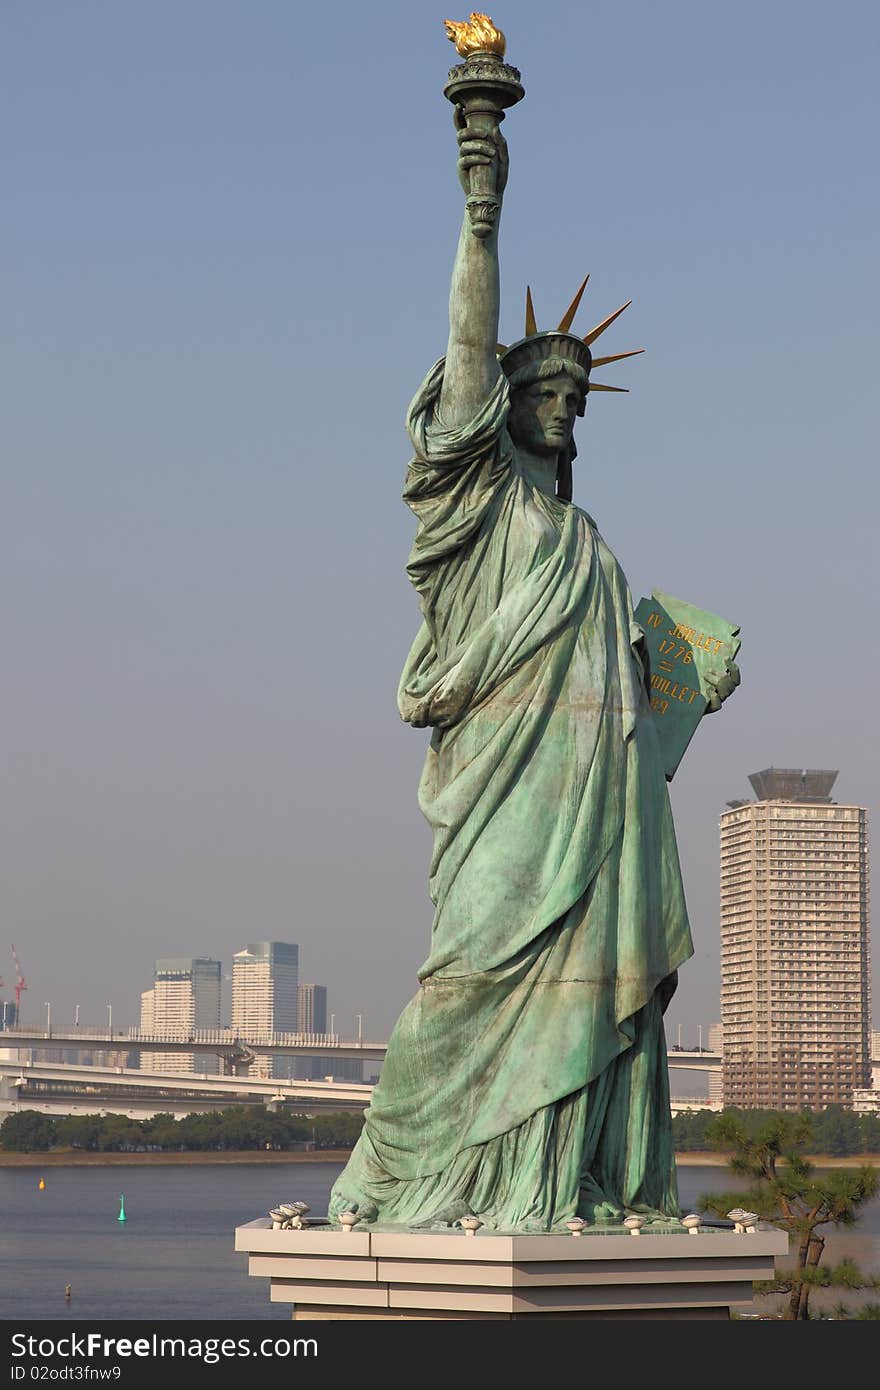 Statue of Liberty in Tokyo (There are 3 Statues of Liberty: Tokyo, New York and France)